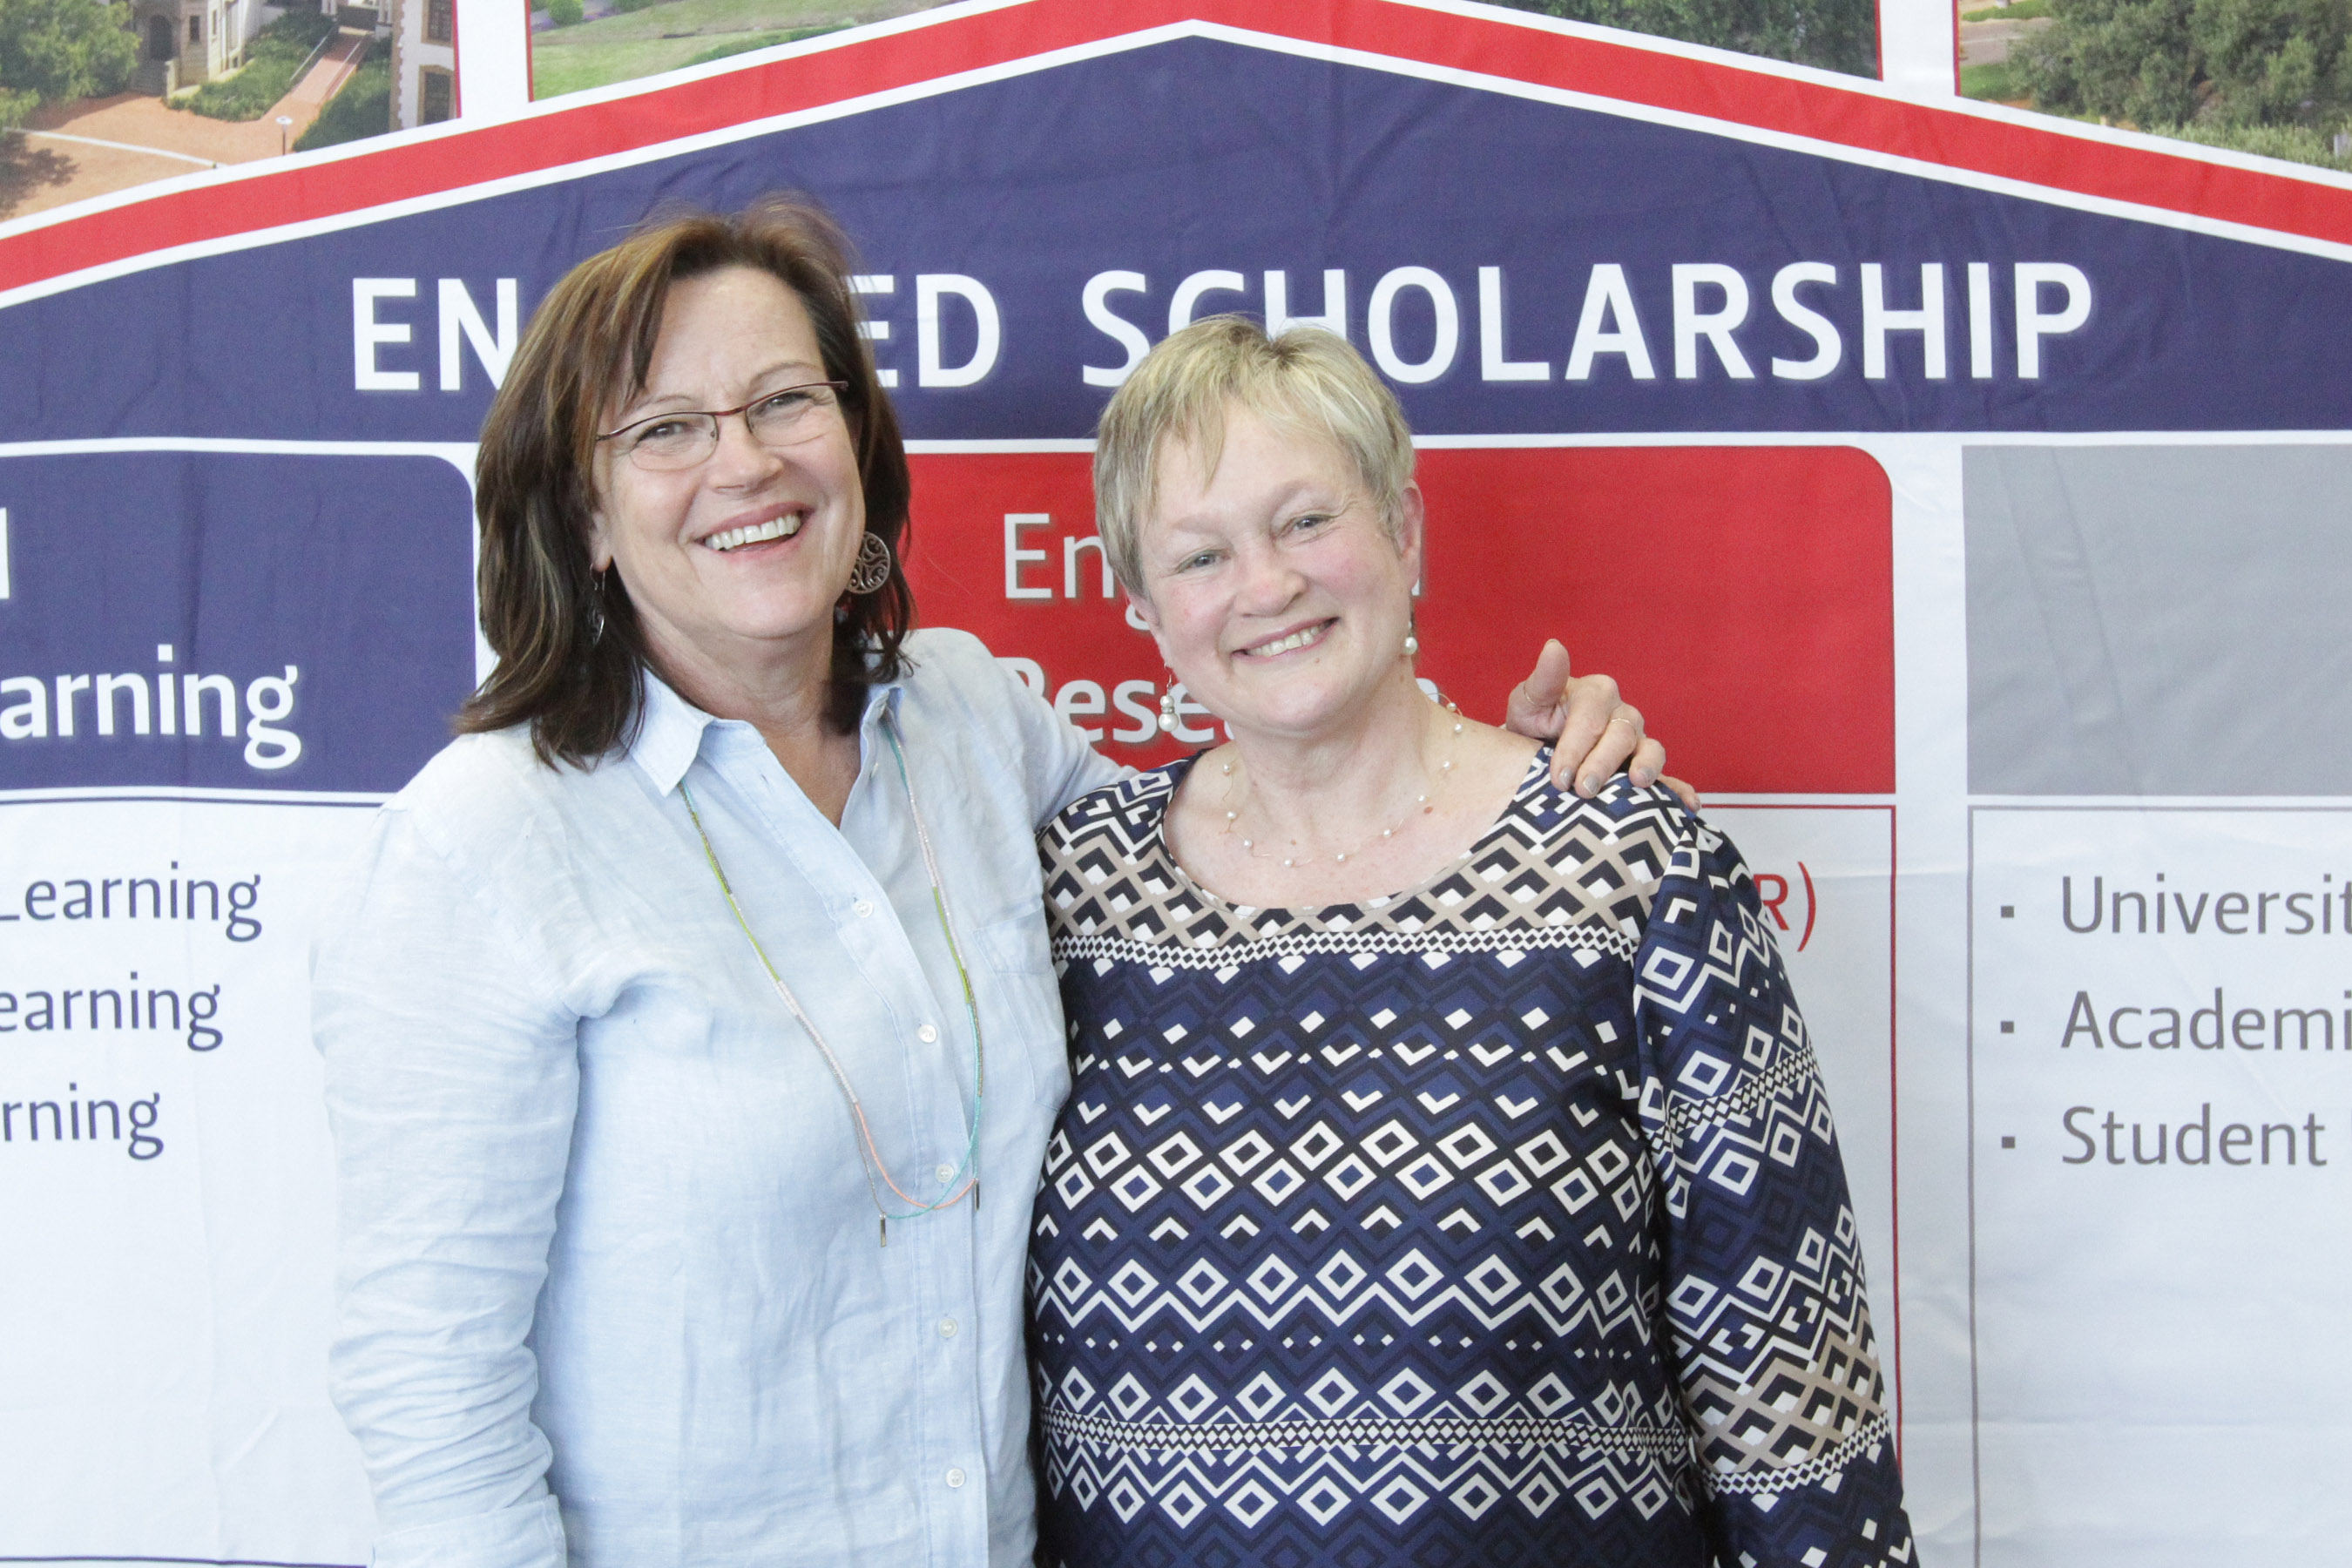 Diana Hornby, Director of Community Engagement at Rhodes University and a speaker at the conference, with Karen Venter.